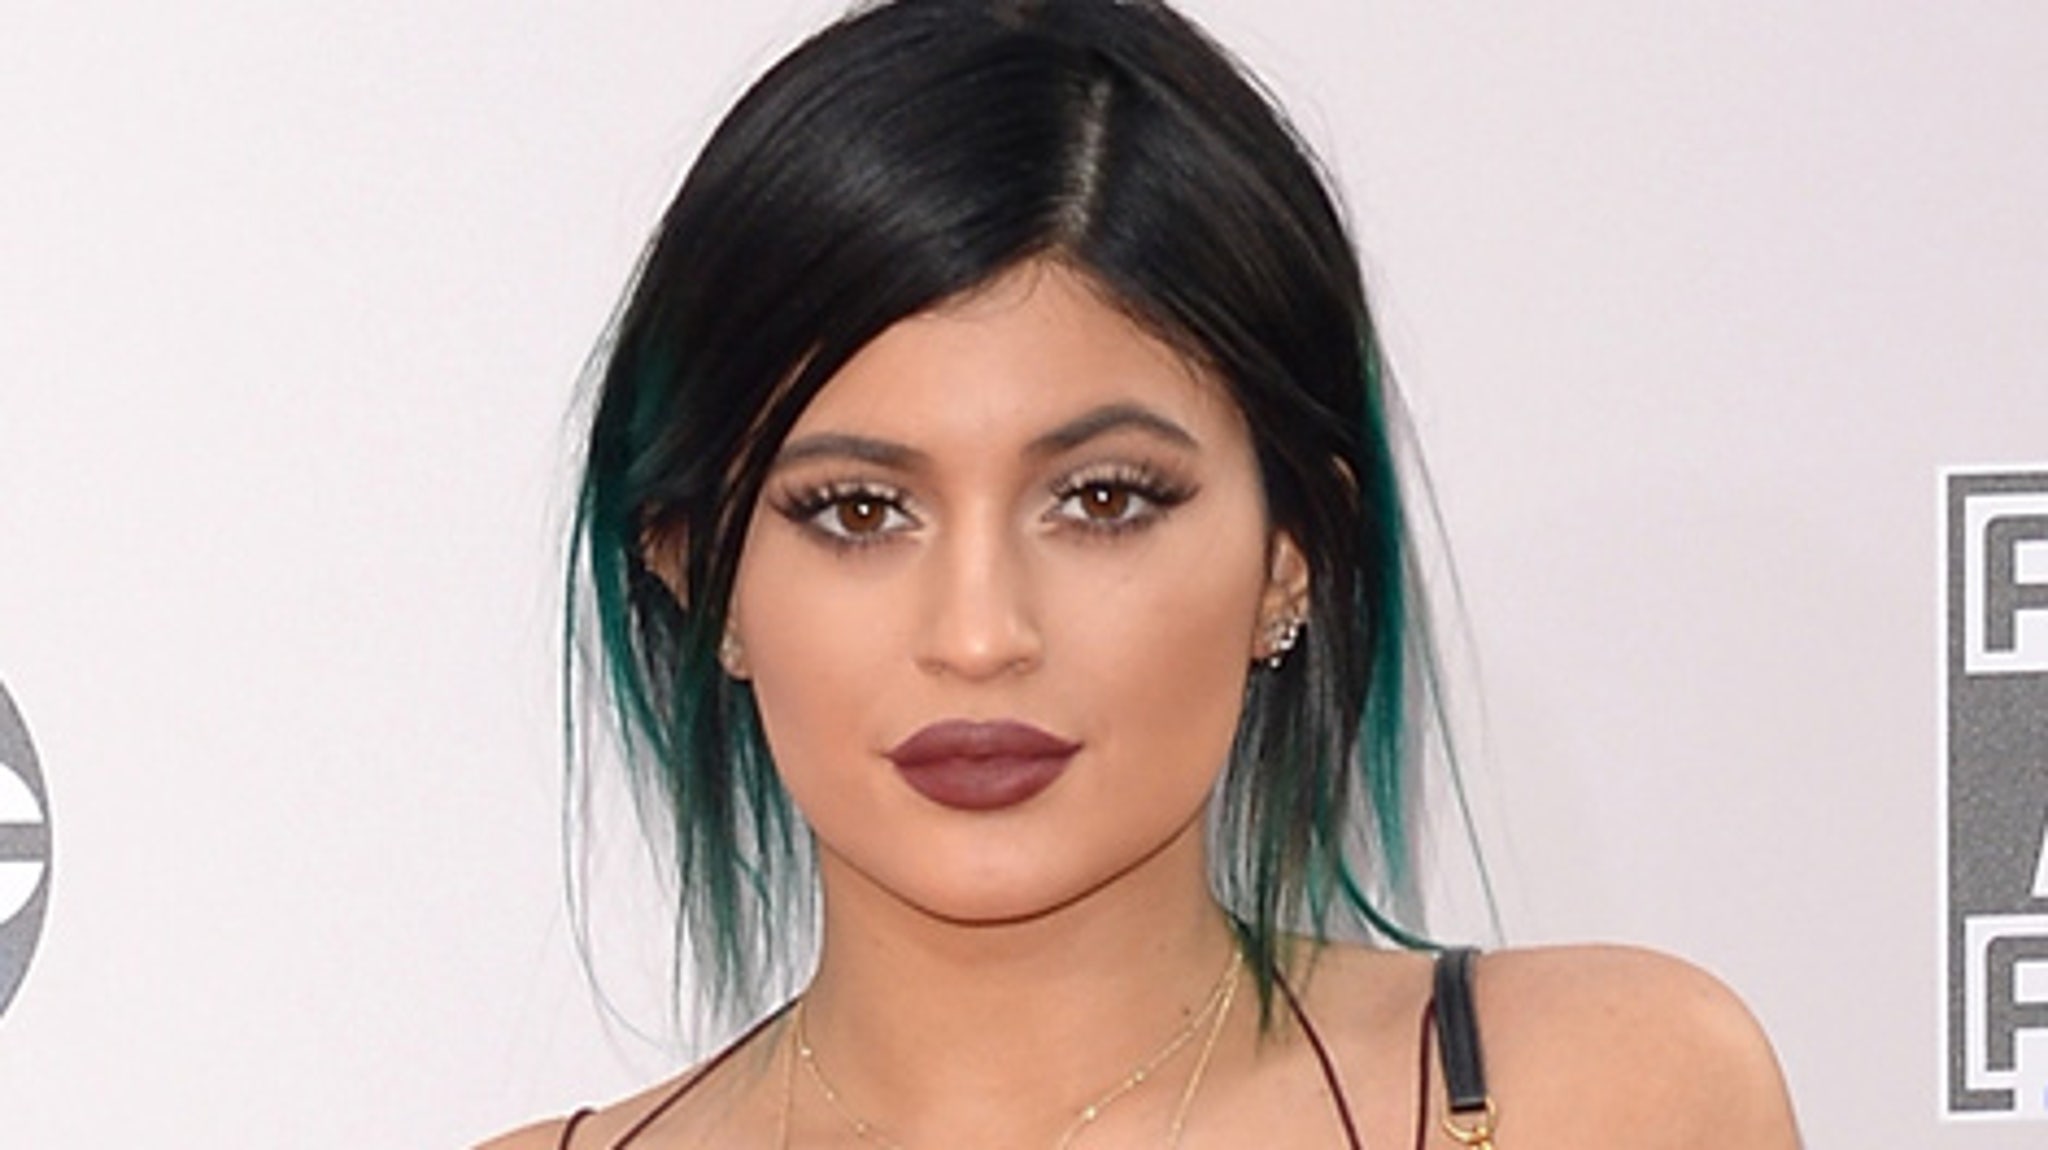 Ouch! Kylie Jenner Says Sister Khloe Kardashian Is 